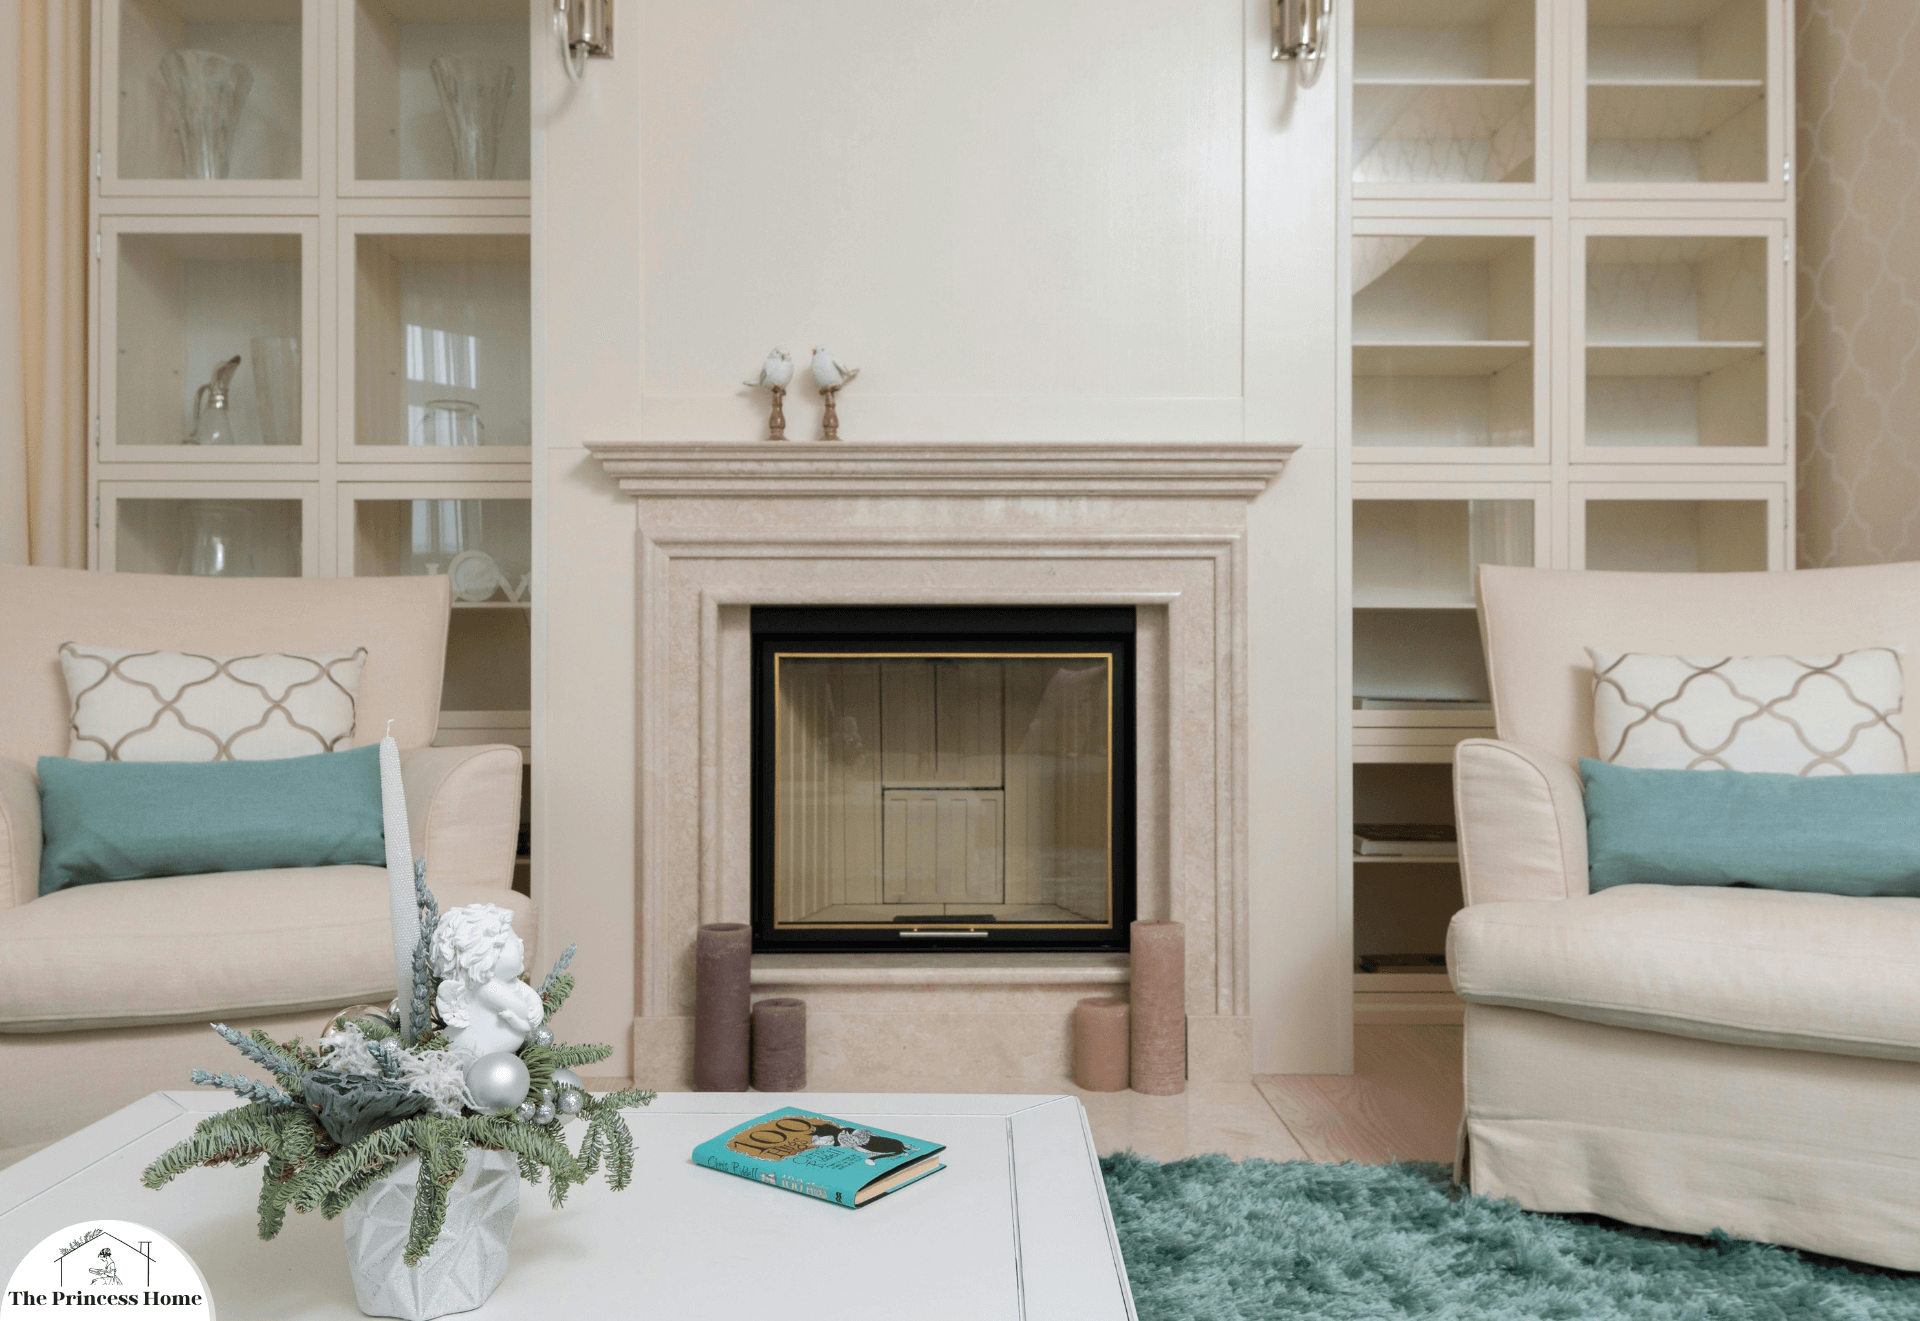 5.Maintaining a Clean Fireplace